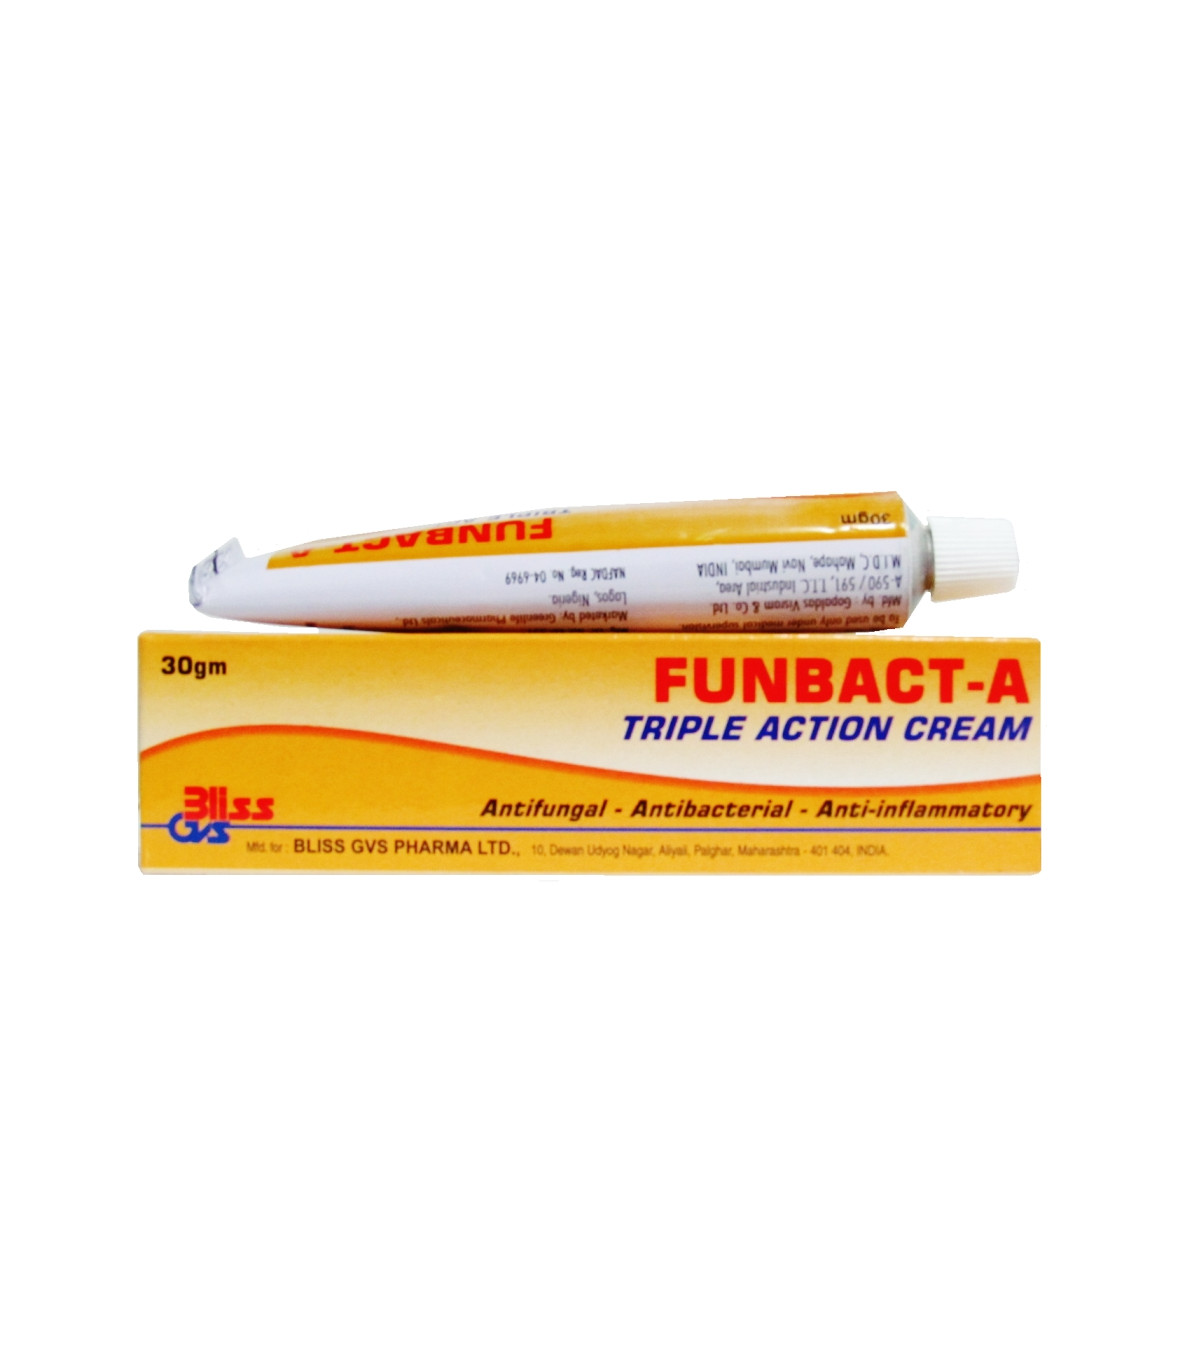 Funbact-A Triple Action Cream - 30g